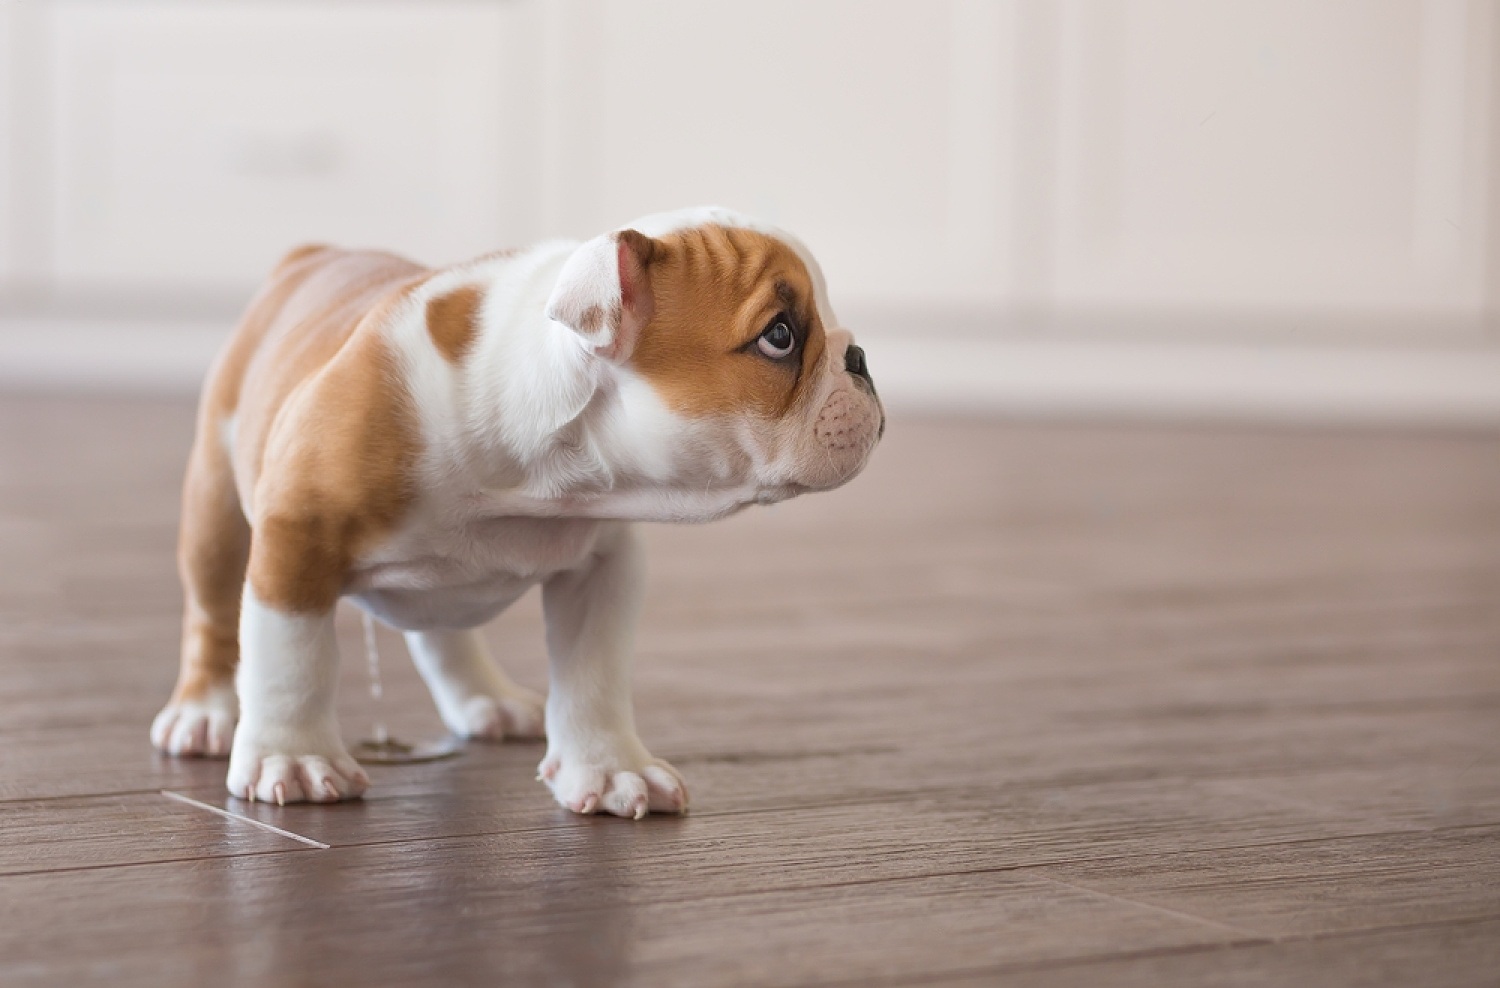 How Long Can Dogs Hold Their Pee?